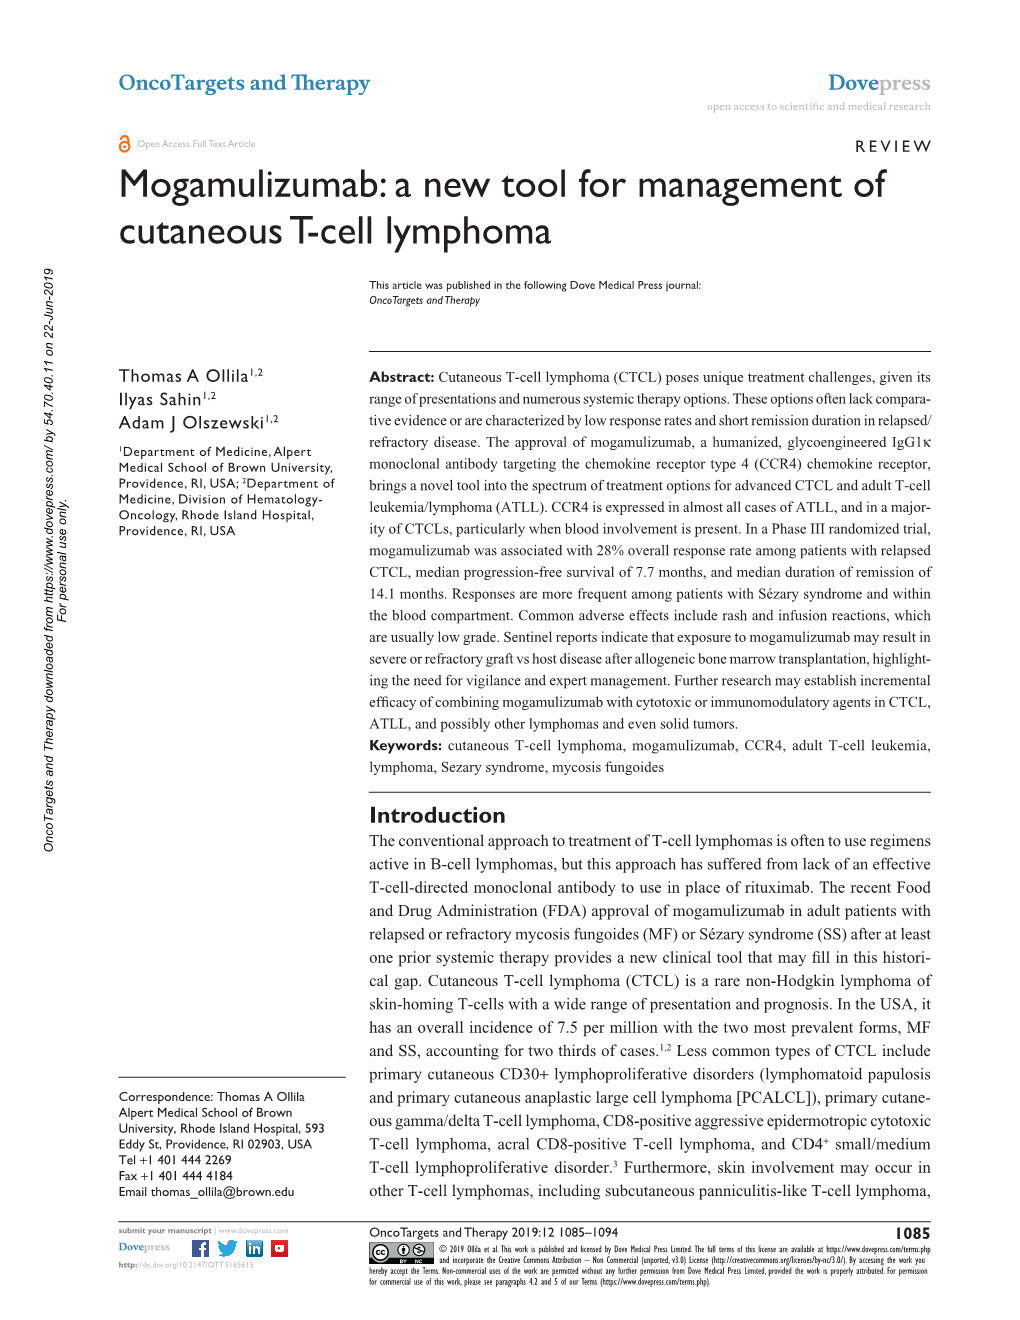 A New Tool for Management of Cutaneous T-Cell Lymphoma